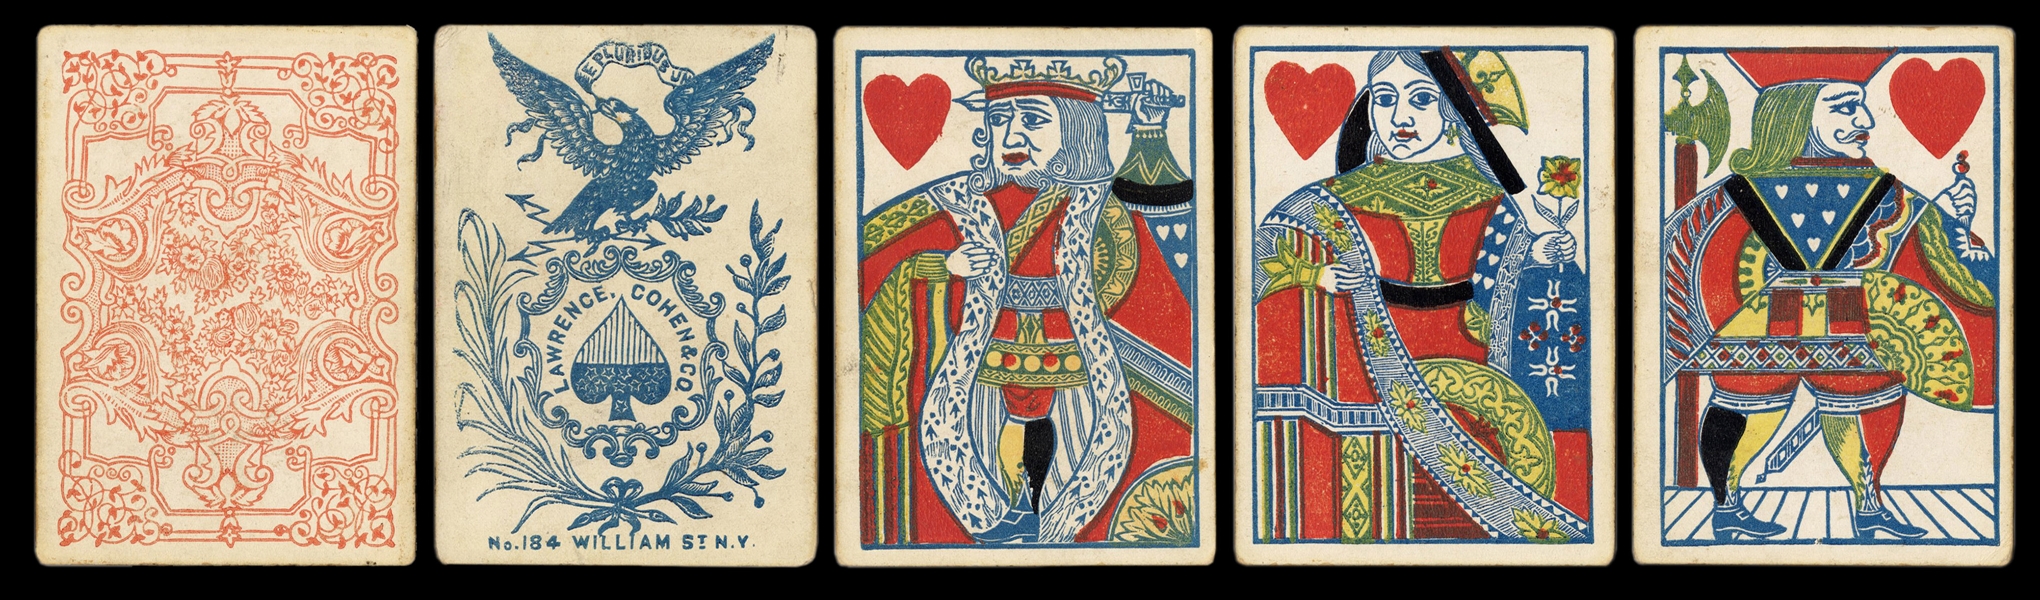  Lawrence & Cohen Playing Cards. New York, ca. 1860. 52 (com...